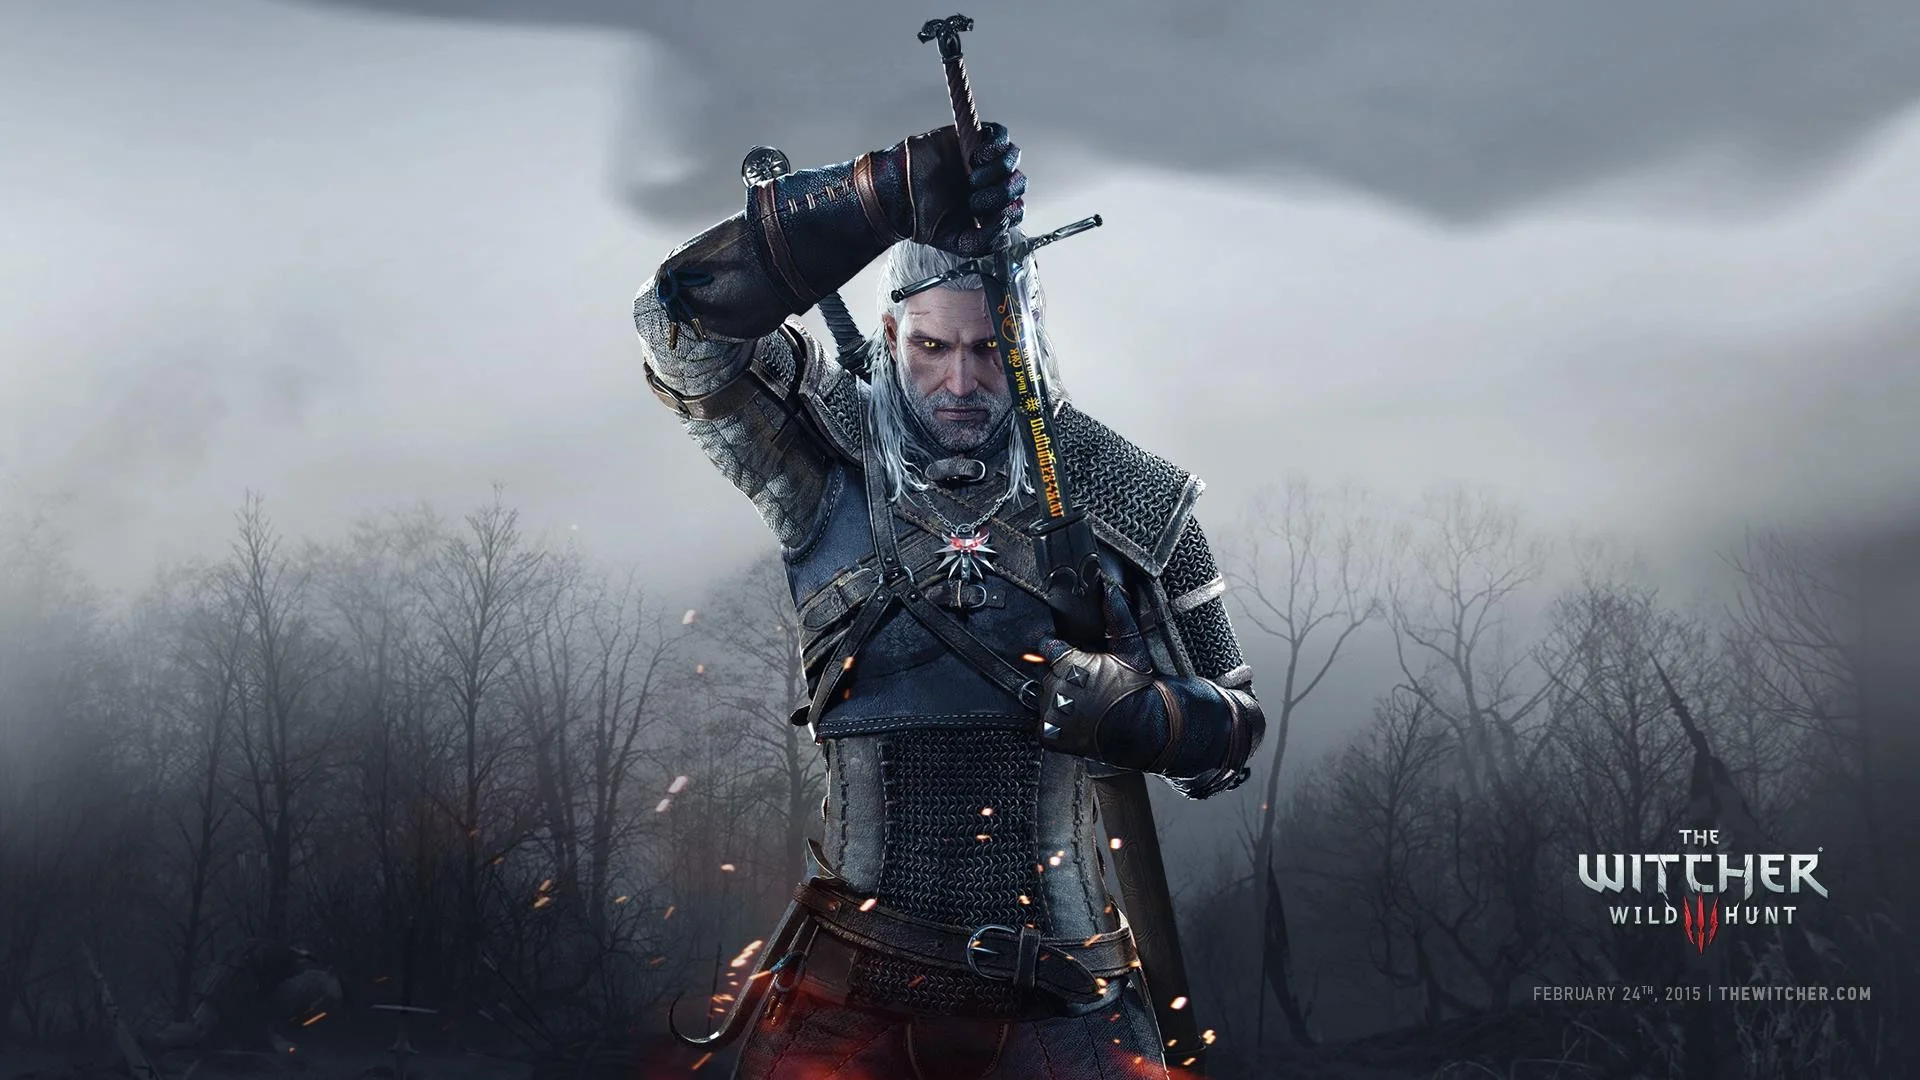 The Witcher 3 art featuring Triss and Emhyr var Emreis released .